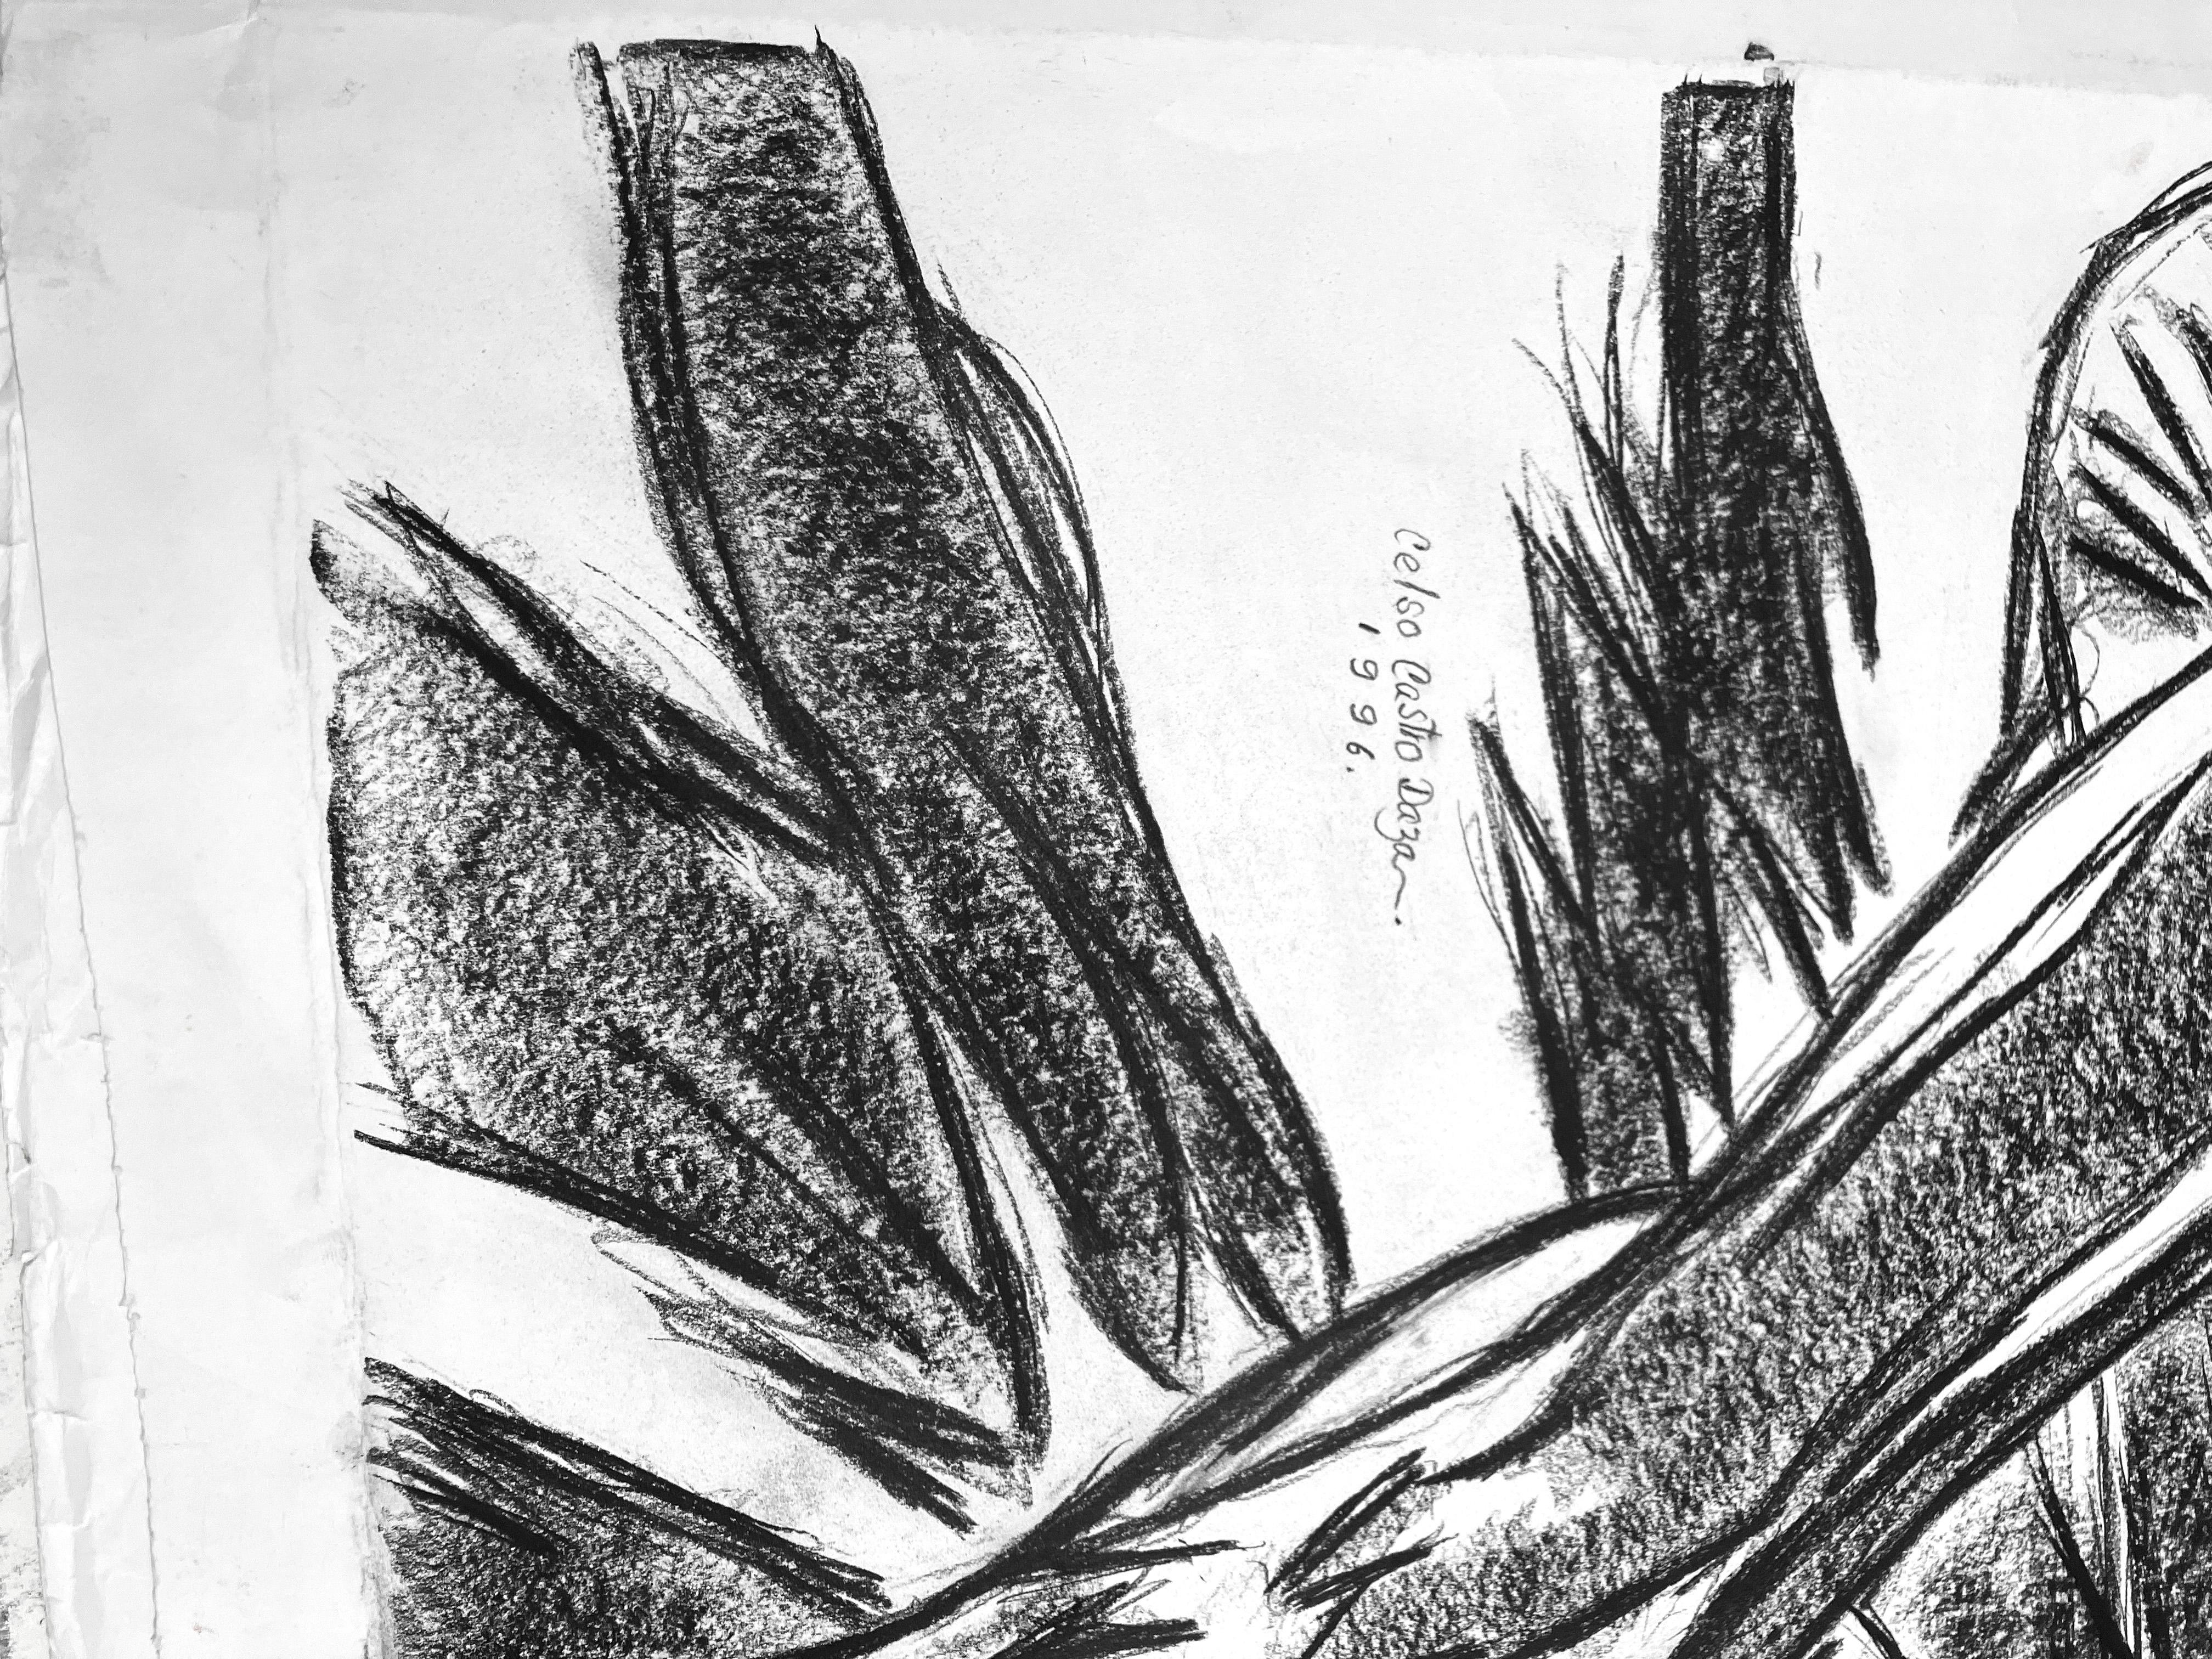 Untitled, 1996  by Celso Castro
Pencil on archival paper
Image size: 39 H in. x 48 in. W 
Sheet size: 43 H in. x 59 in. W 
Unframed
____________
Undefined by medium, Celso Castro’s works each carry the presence of the artist’s hand through the